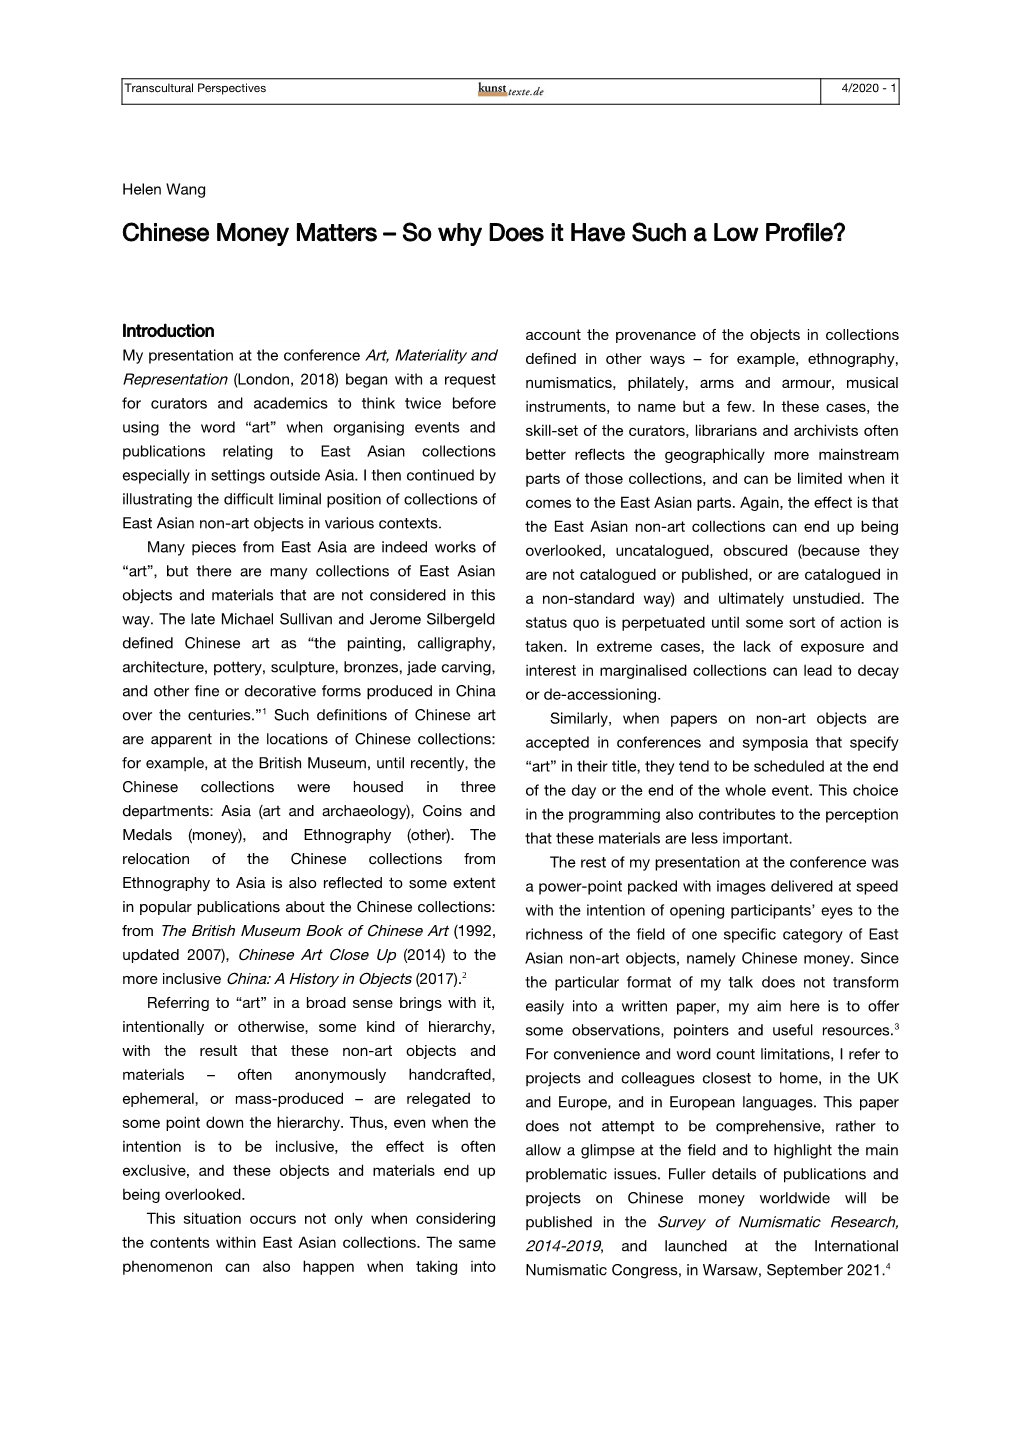 Chinese Money Matters – So Why Does It Have Such a Low Profile?